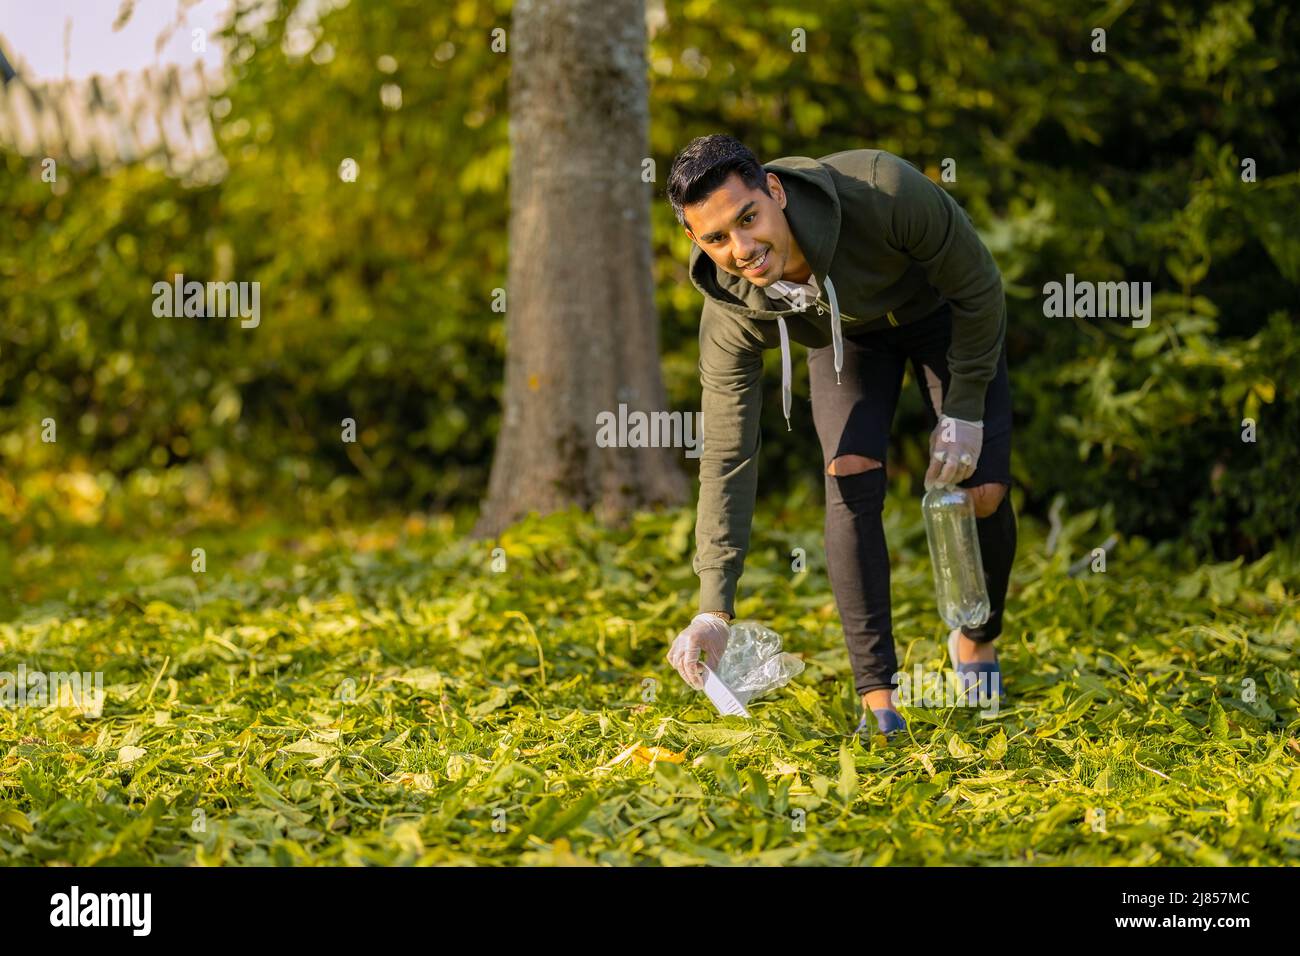 Smiling and committed volunteer cleaning garbage on grass in nature Stock Photo